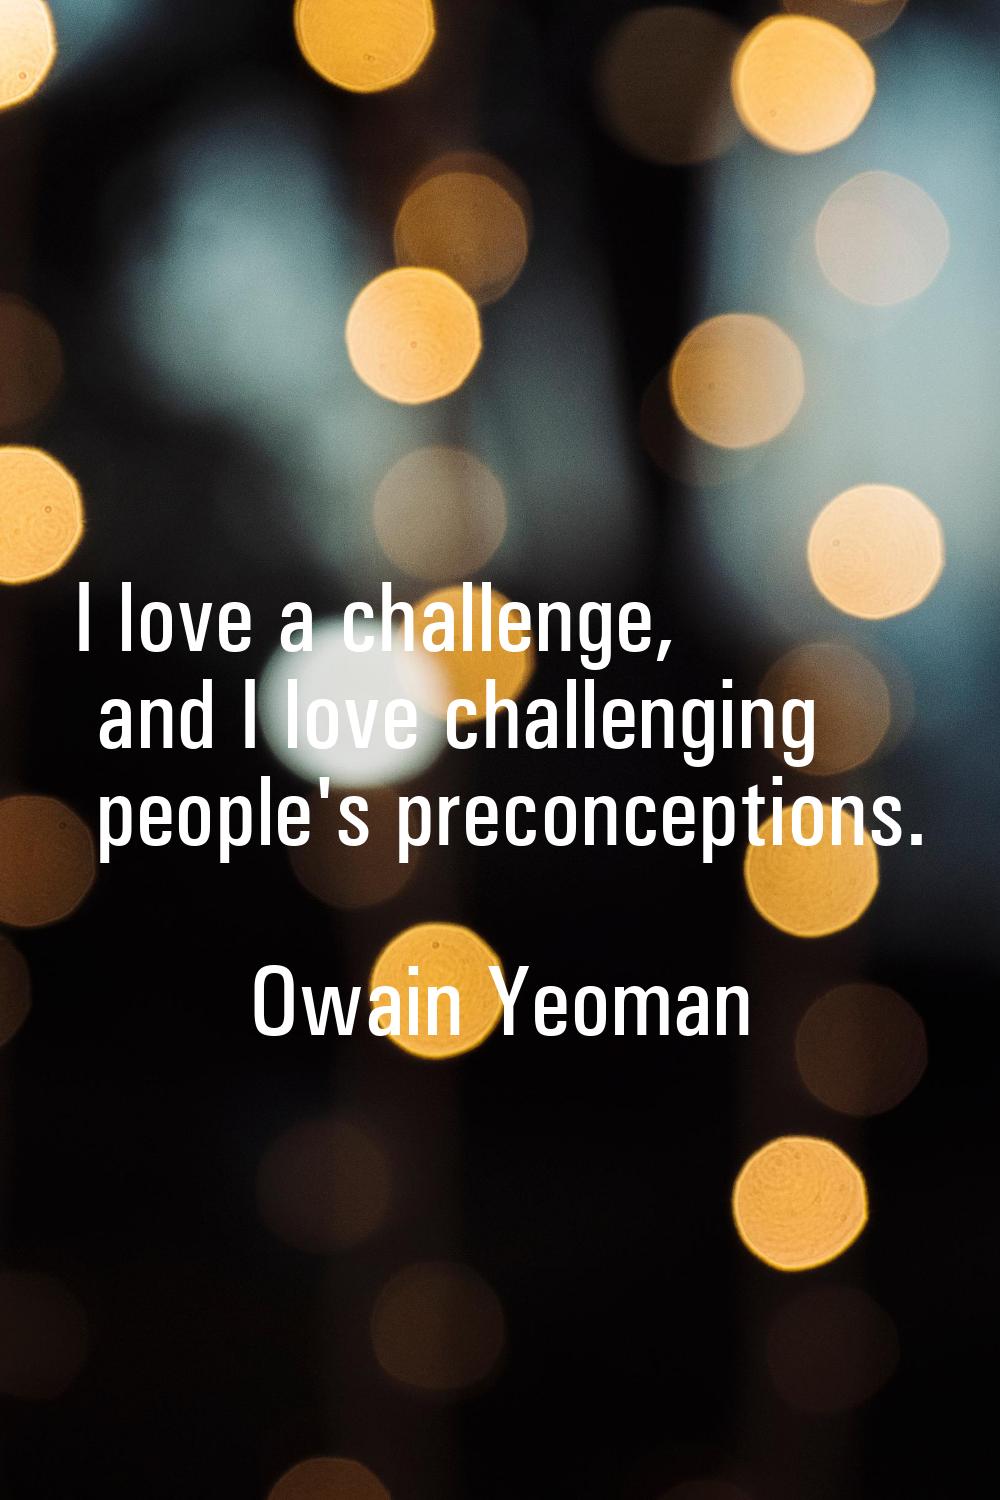 I love a challenge, and I love challenging people's preconceptions.